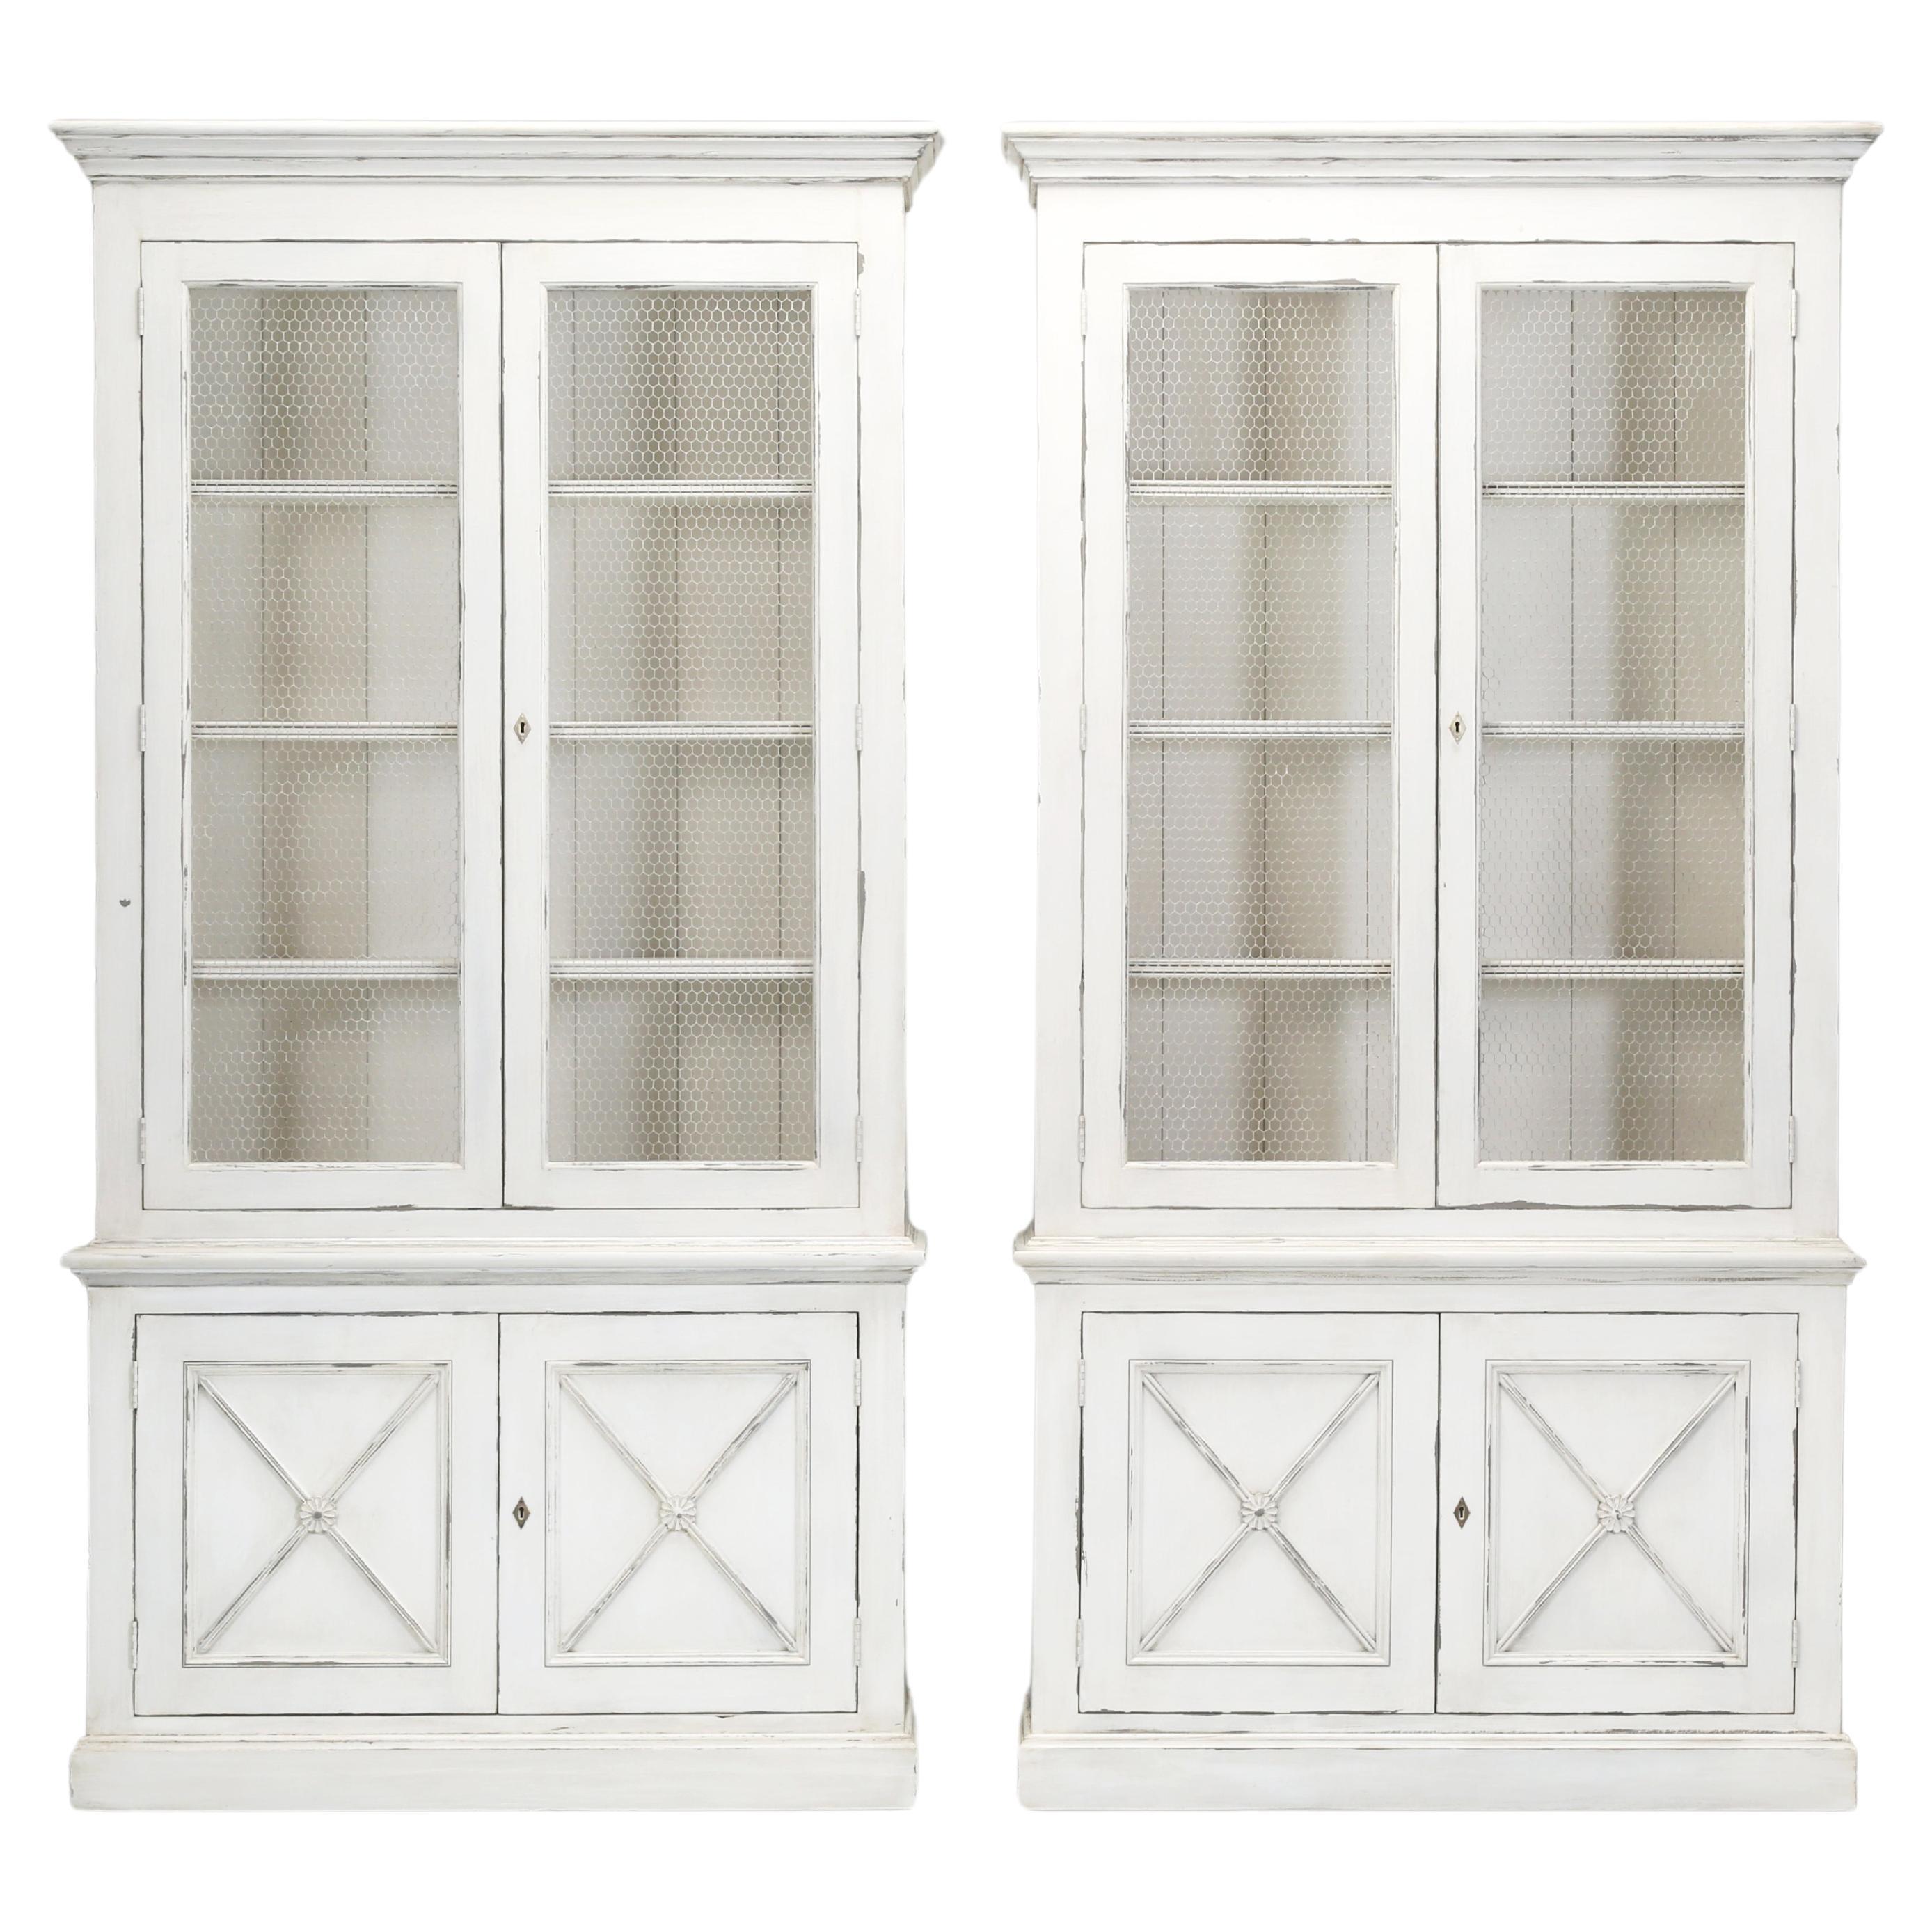 Pair of Directoire Style Bookcases, China Cabinets Made by Old Plank in Any Size For Sale